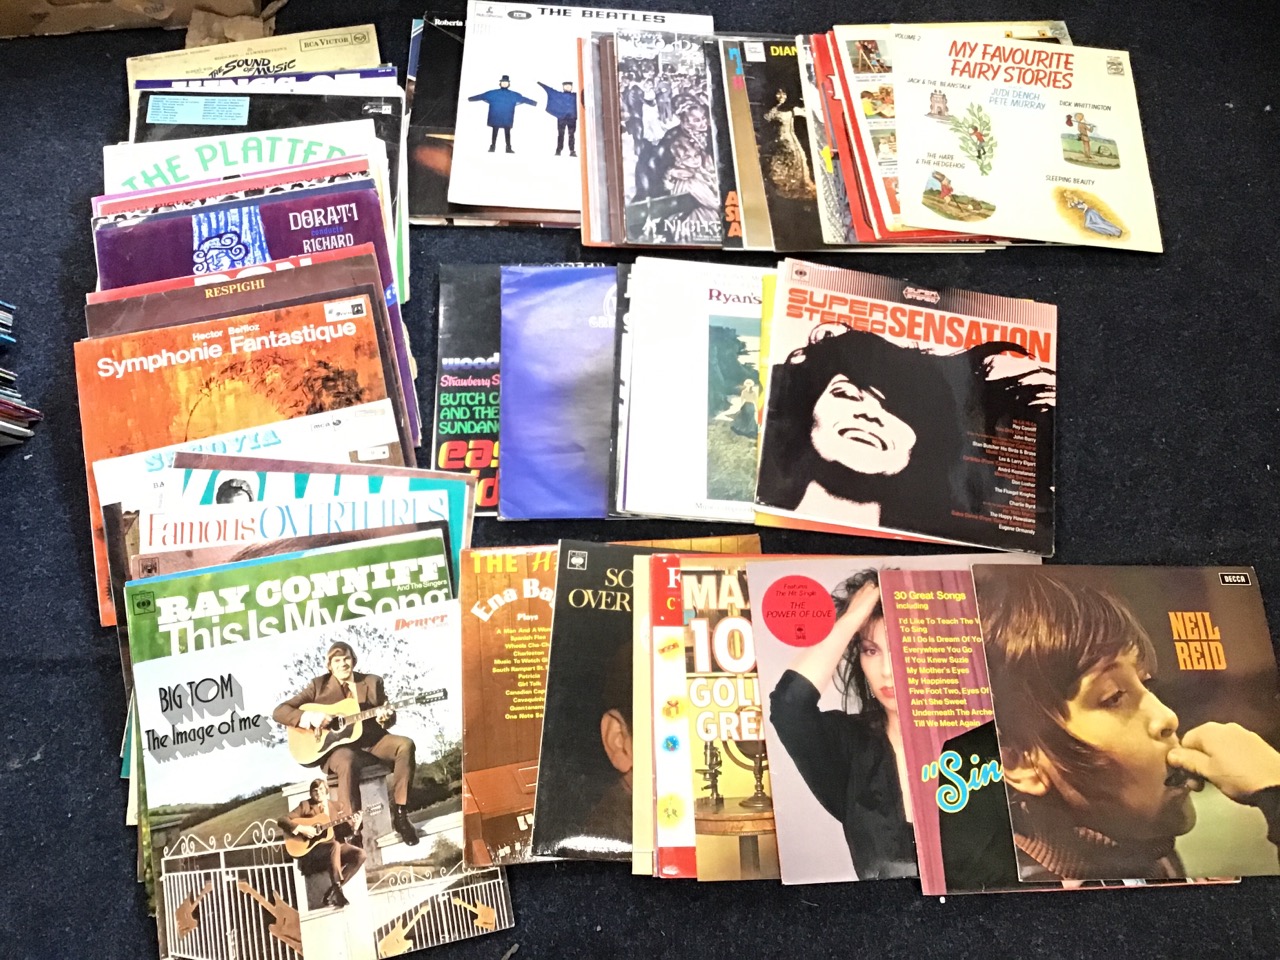 A collection of vinyl LPs, mainly late C20th, country, collections, classical, shows, 60s & 70s pop, - Image 2 of 3